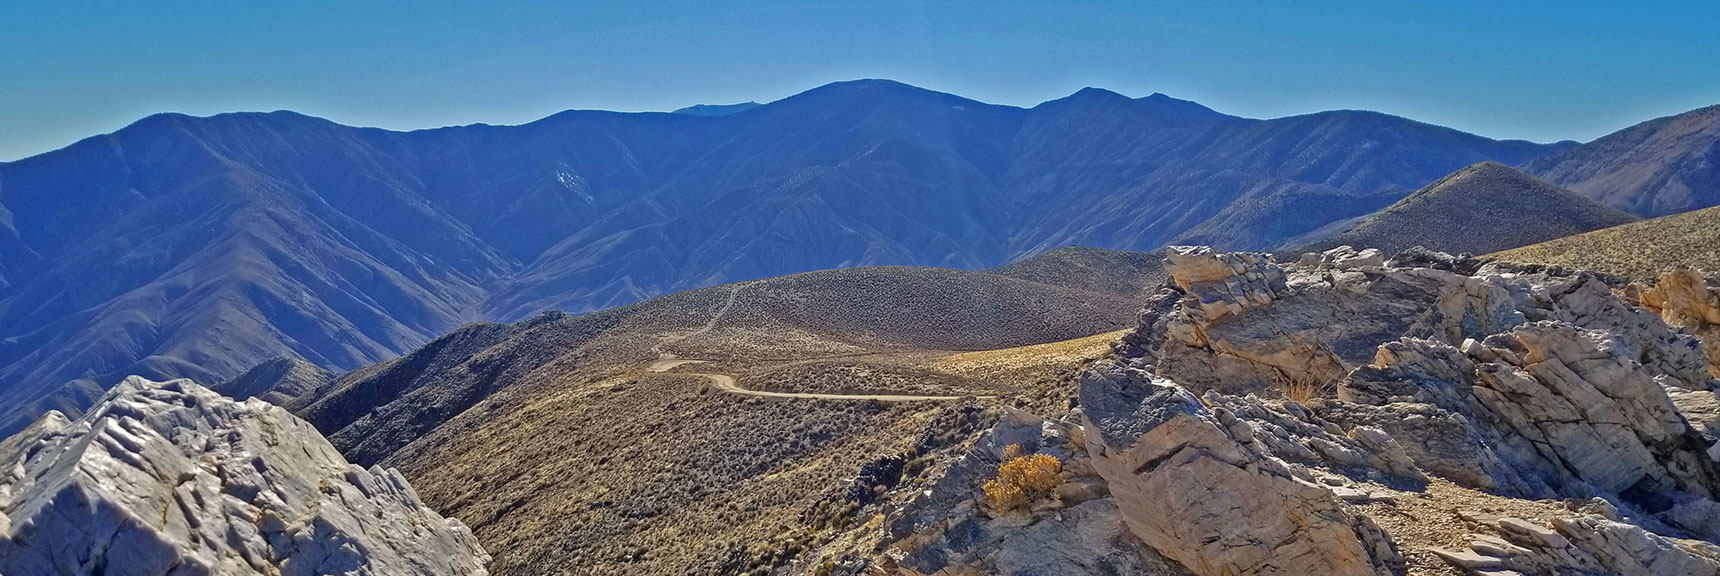 Southern View Down to Aguereberry Point Approach Road, Wildrose Peak in Background | Aguereberry Point | Panamint Mountain Range | Death Valley National Park, California